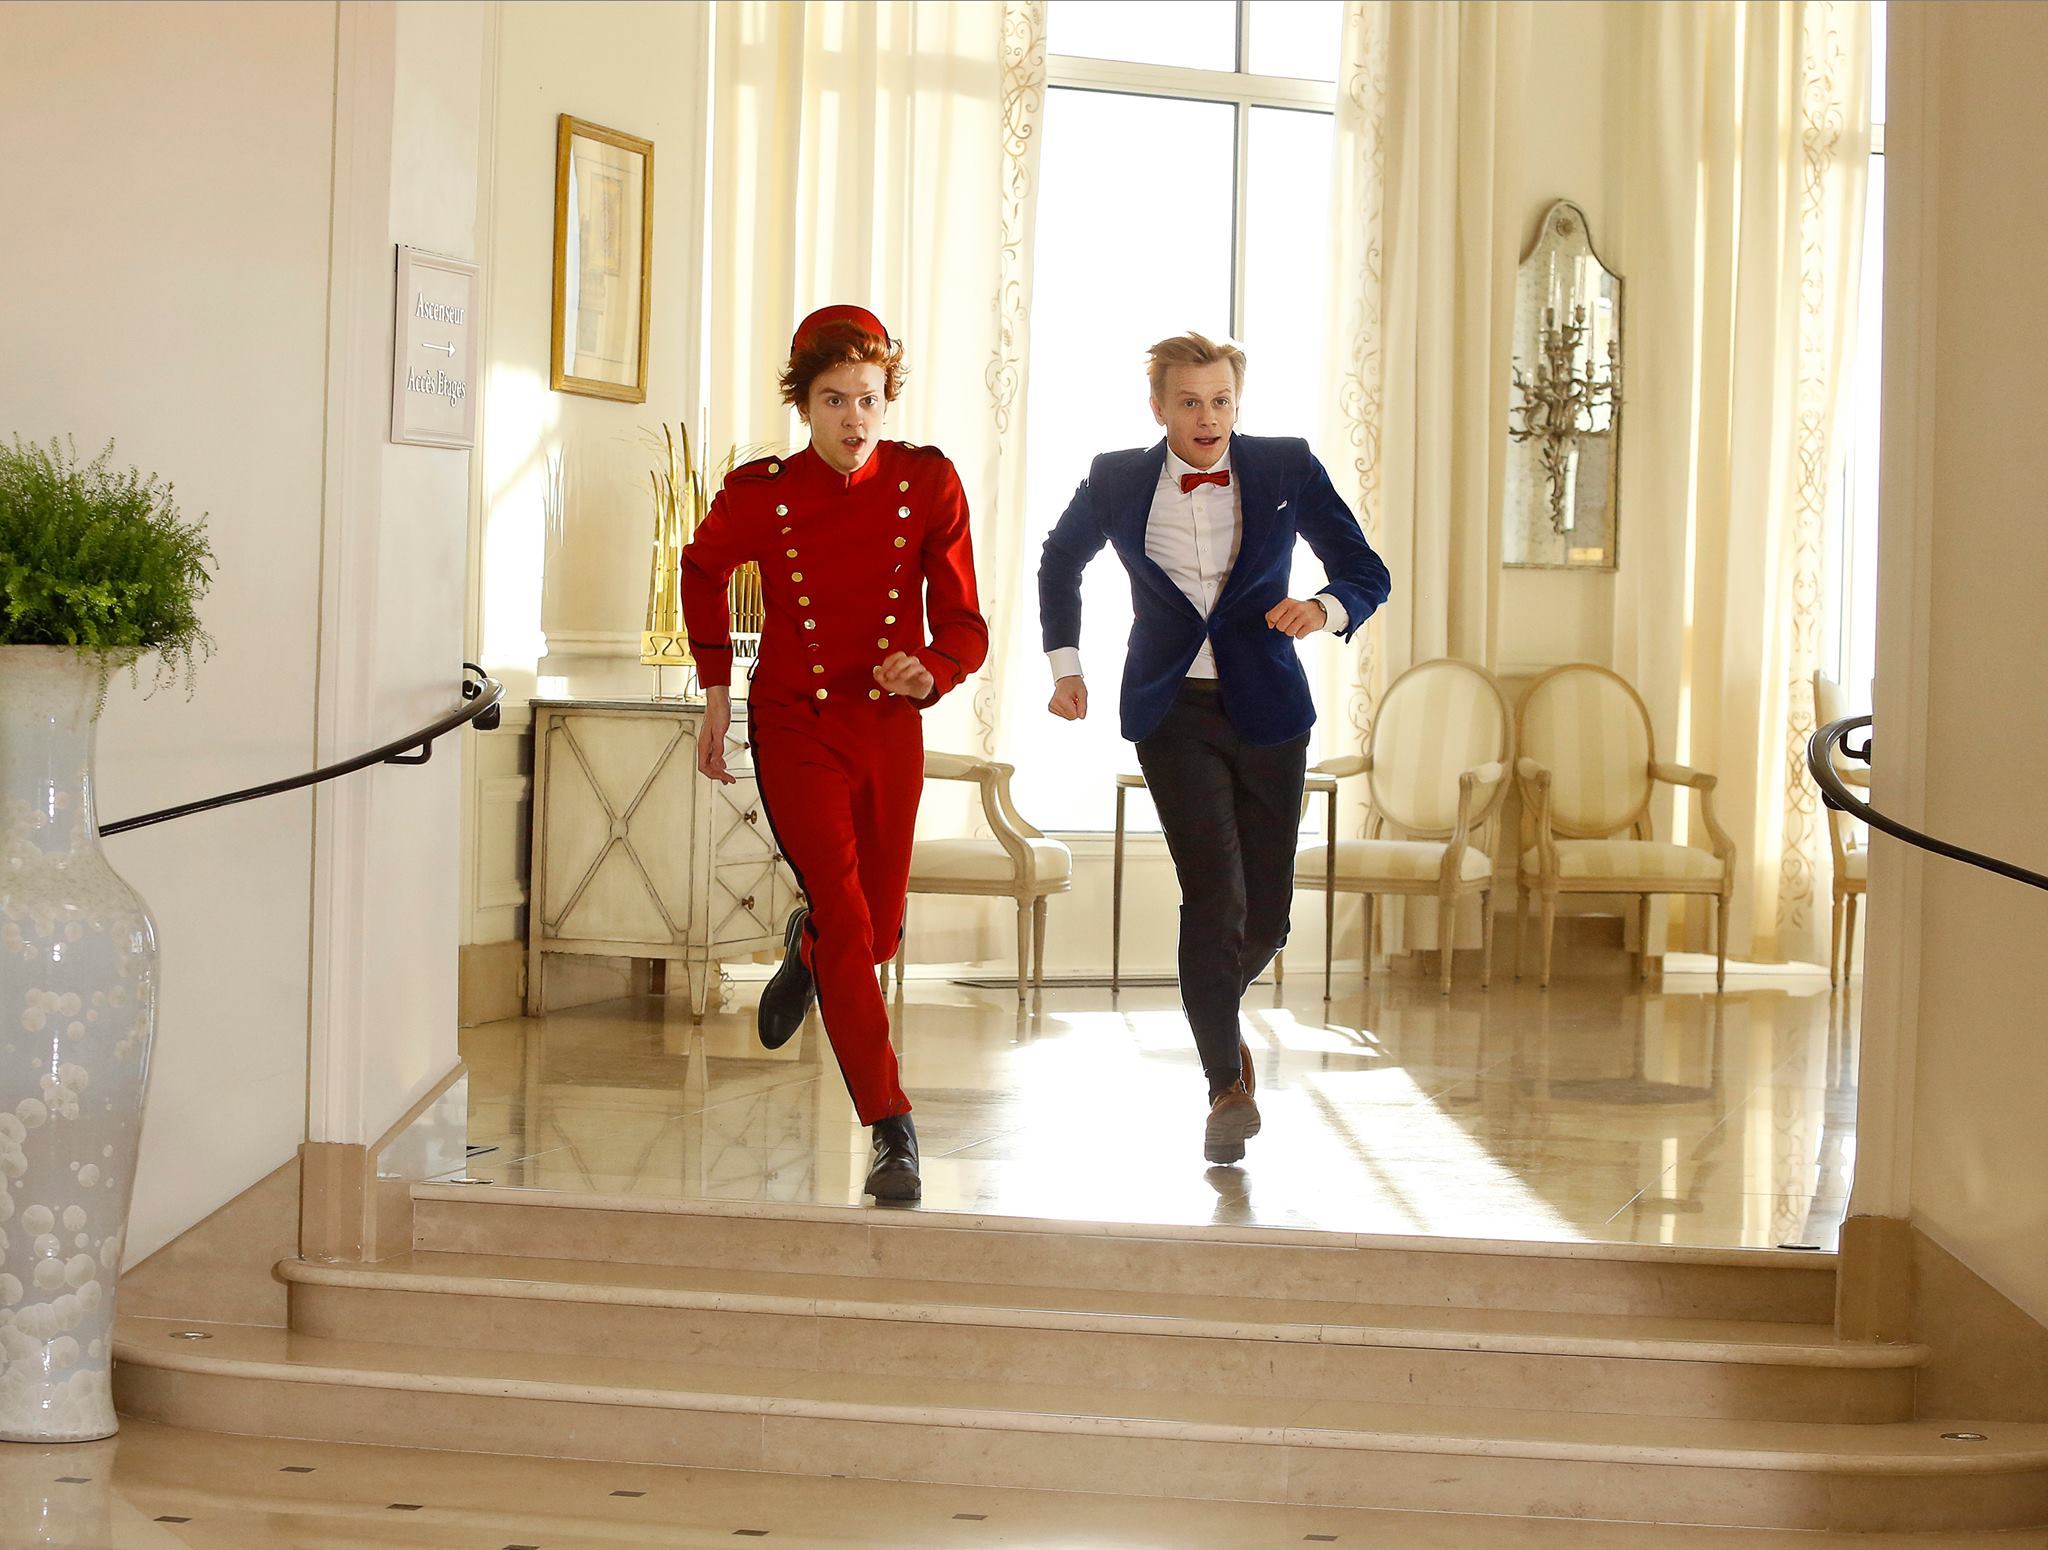 Spirou and Fantasio (Thomas Solivérès and Alex Lutz) running in hotel, from film shoot (image from facebook.com/SpirouEtFantasio.Film/)